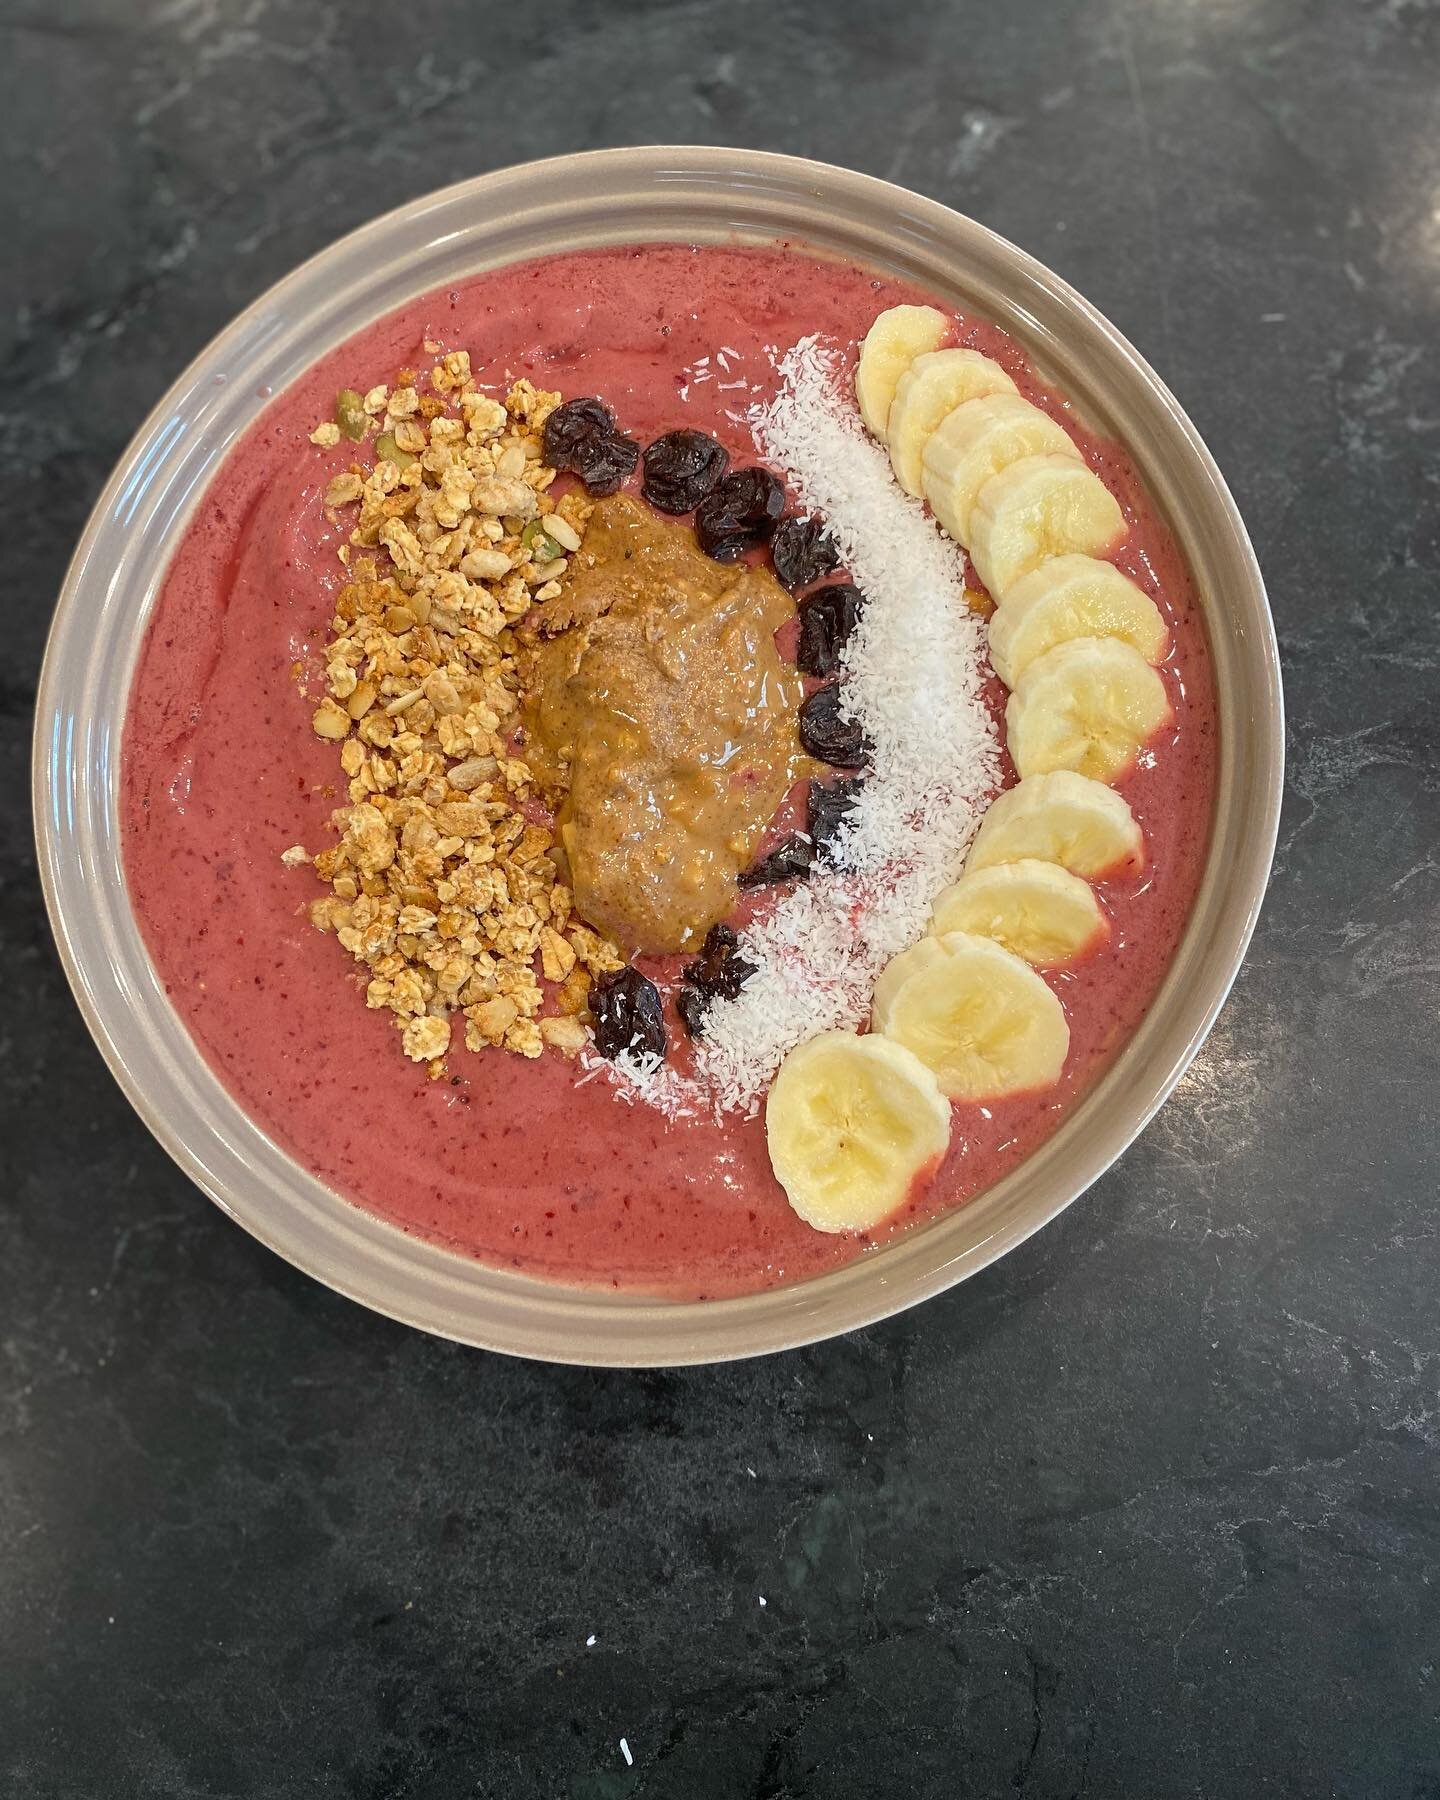 Todays smoothie bowl is all about the cherry.  Yum! Topped today with almond butter, granola, dried cherries banana and coconut.
#smoothiebowl #cherry #easytomake